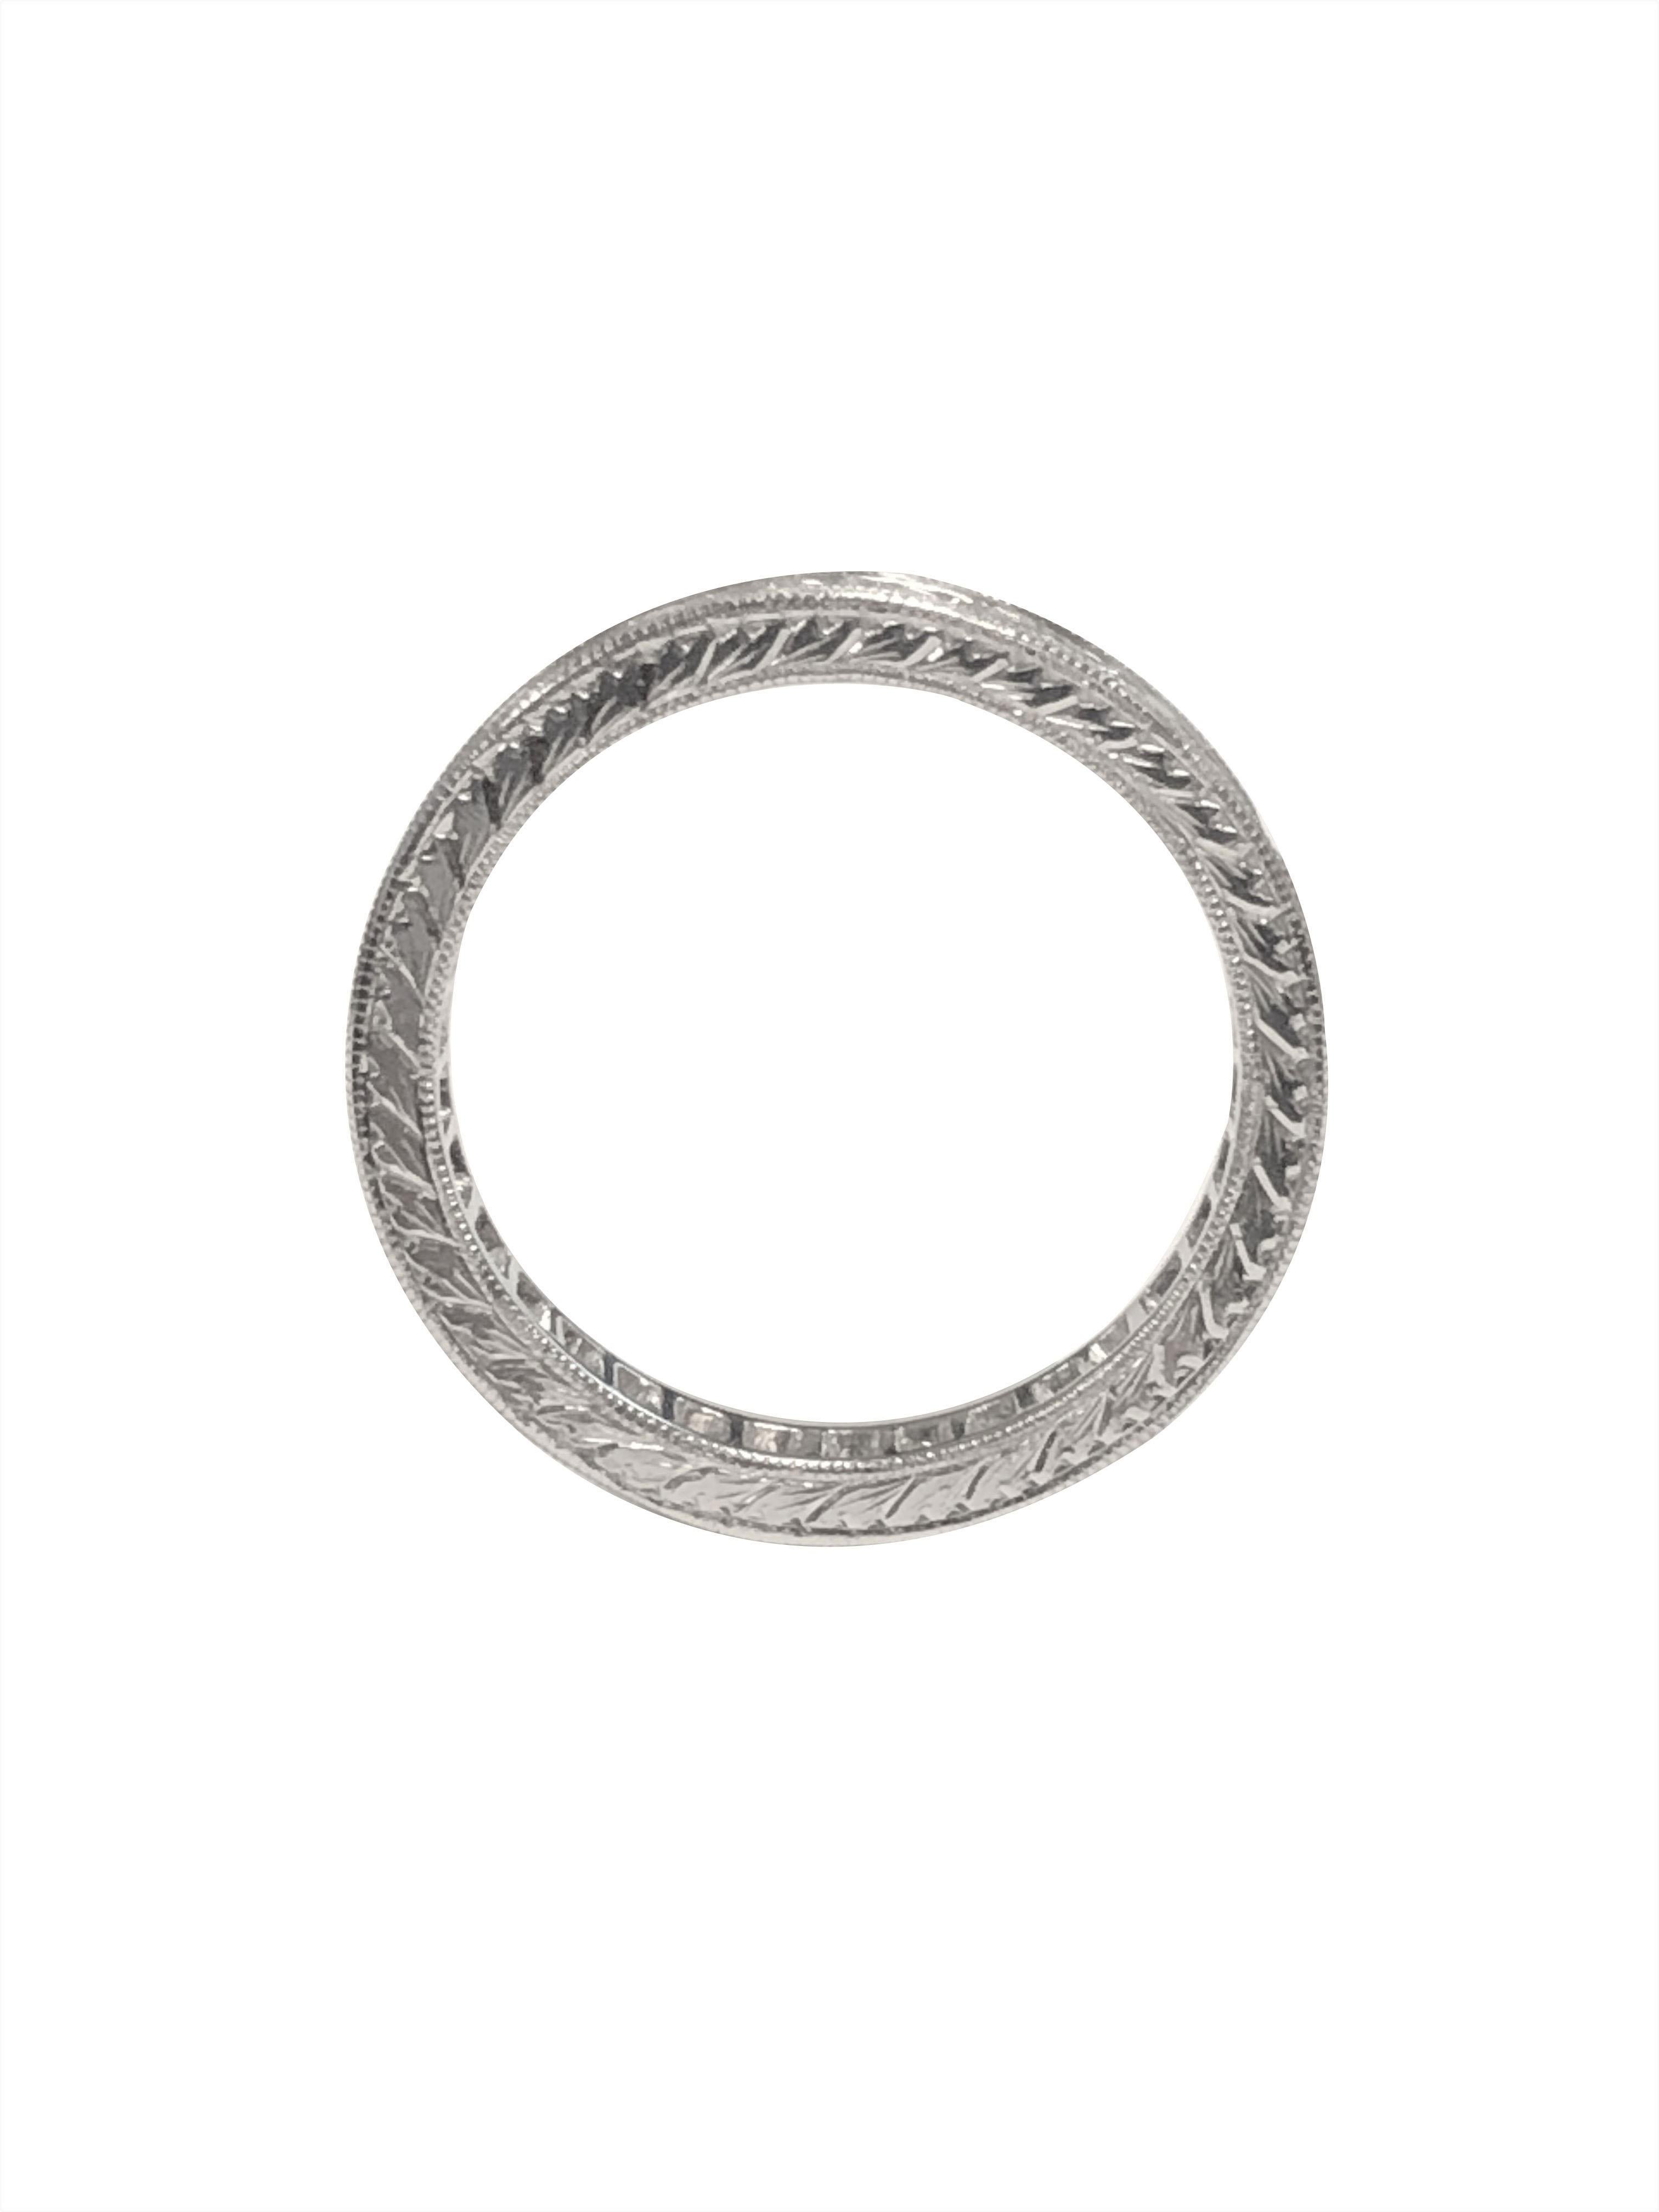 Art Deco Antique French Cut Diamond and Platinum Eternity Band Ring